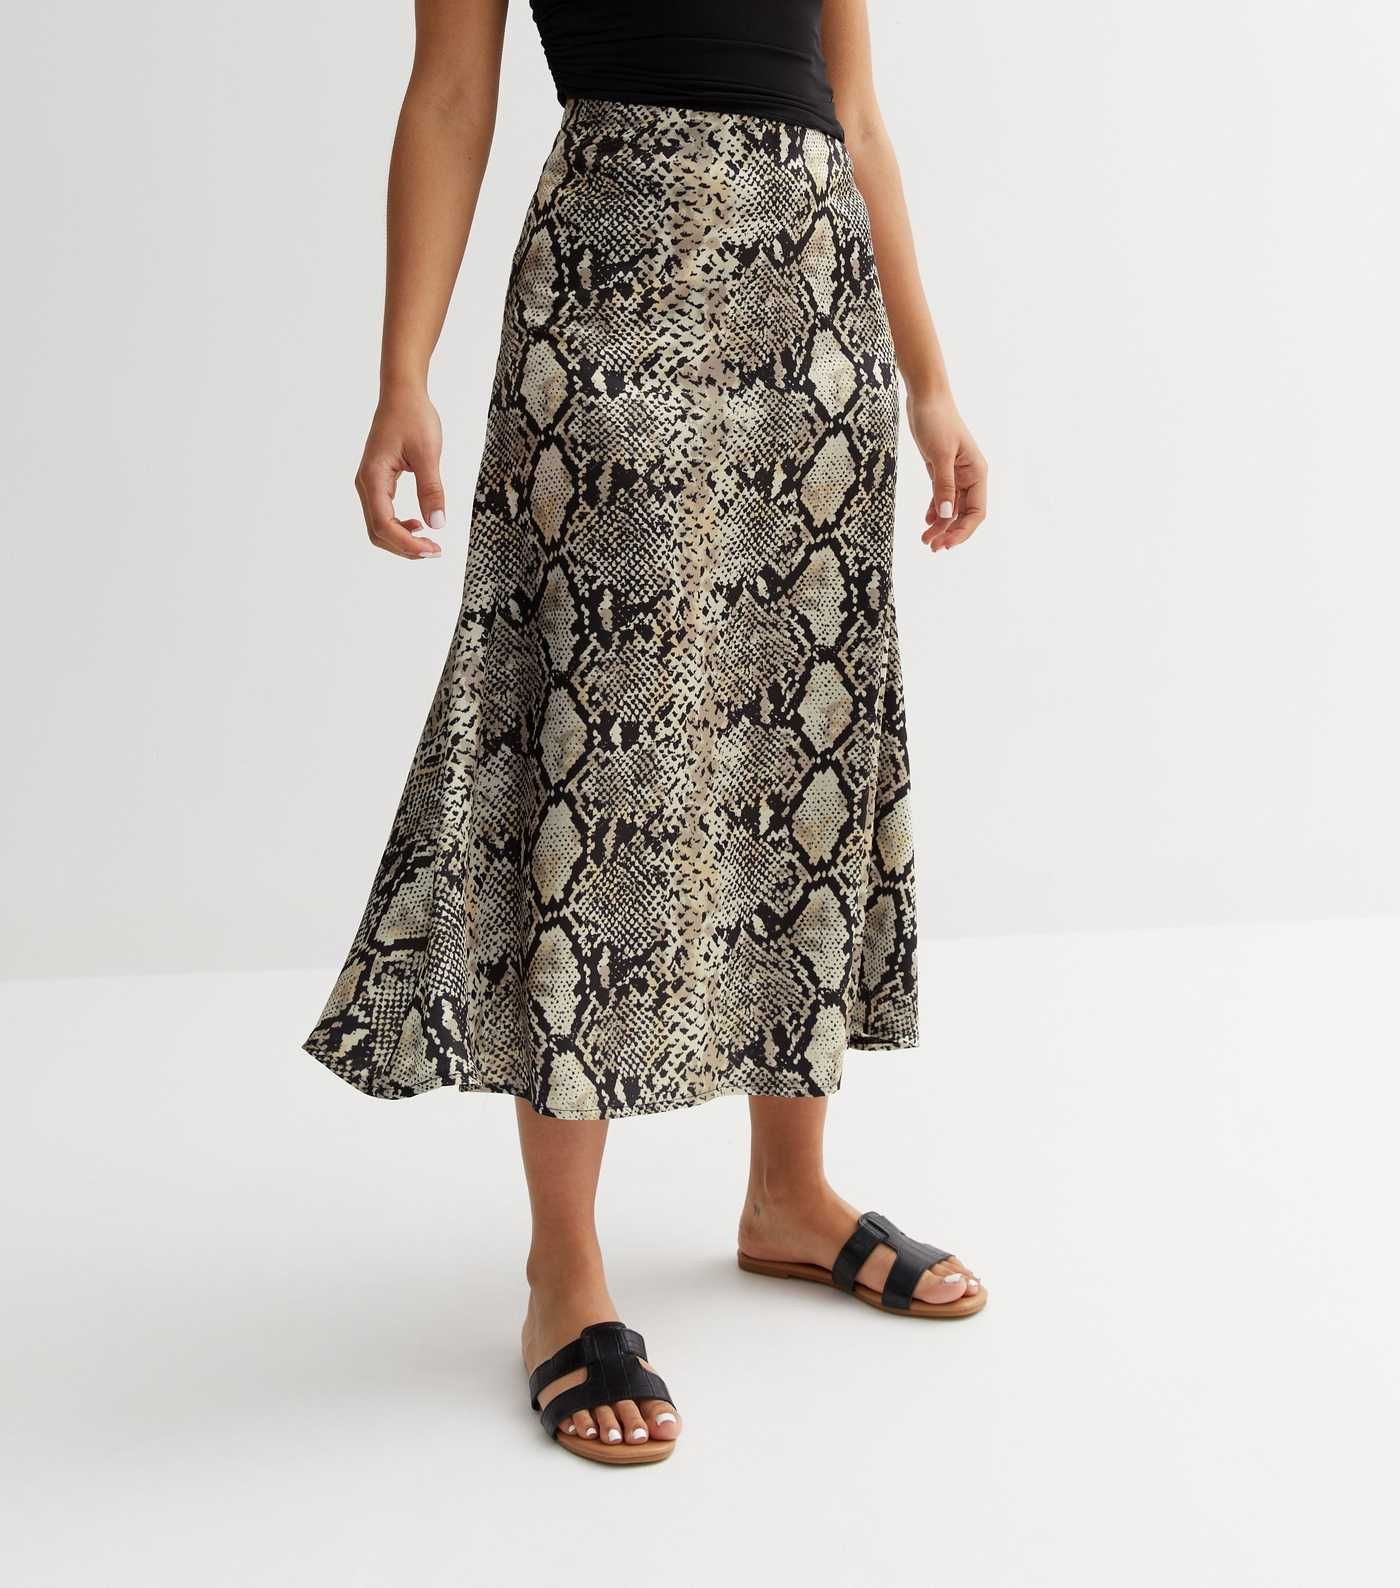 Petite Brown Snake Print Satin Midi Skirt
						
						Add to Saved Items
						Remove from Saved... | New Look (UK)